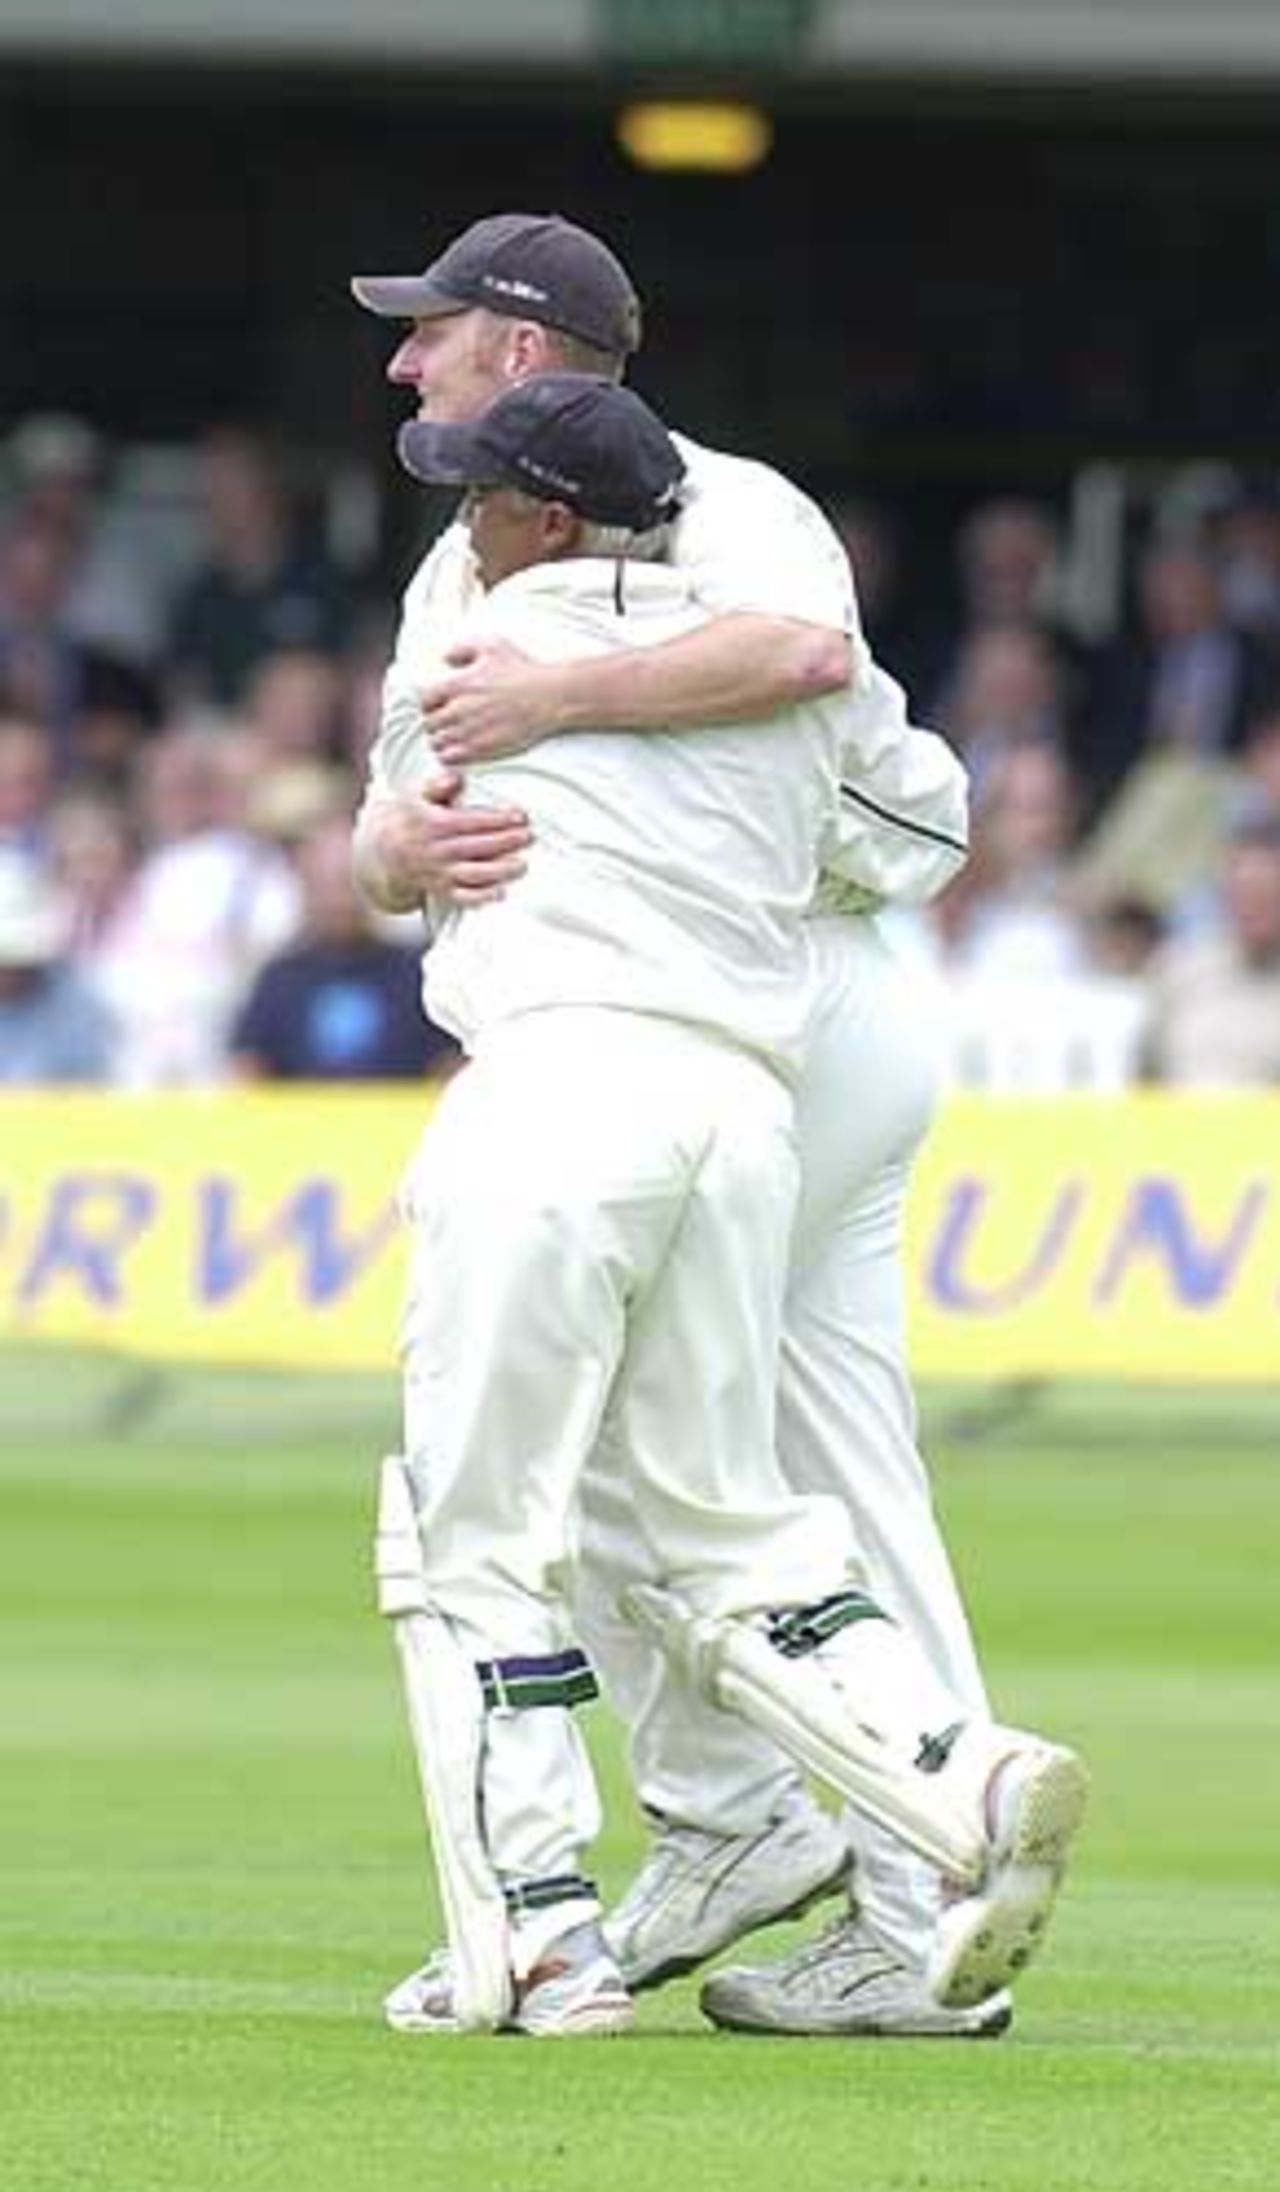 Dougie Brown gets a hug from keeper Keith Piper after he has caught out Ronnie Irani, Essex v Warwickshire, B and H Cup Final, Lord's, 22 June 2002